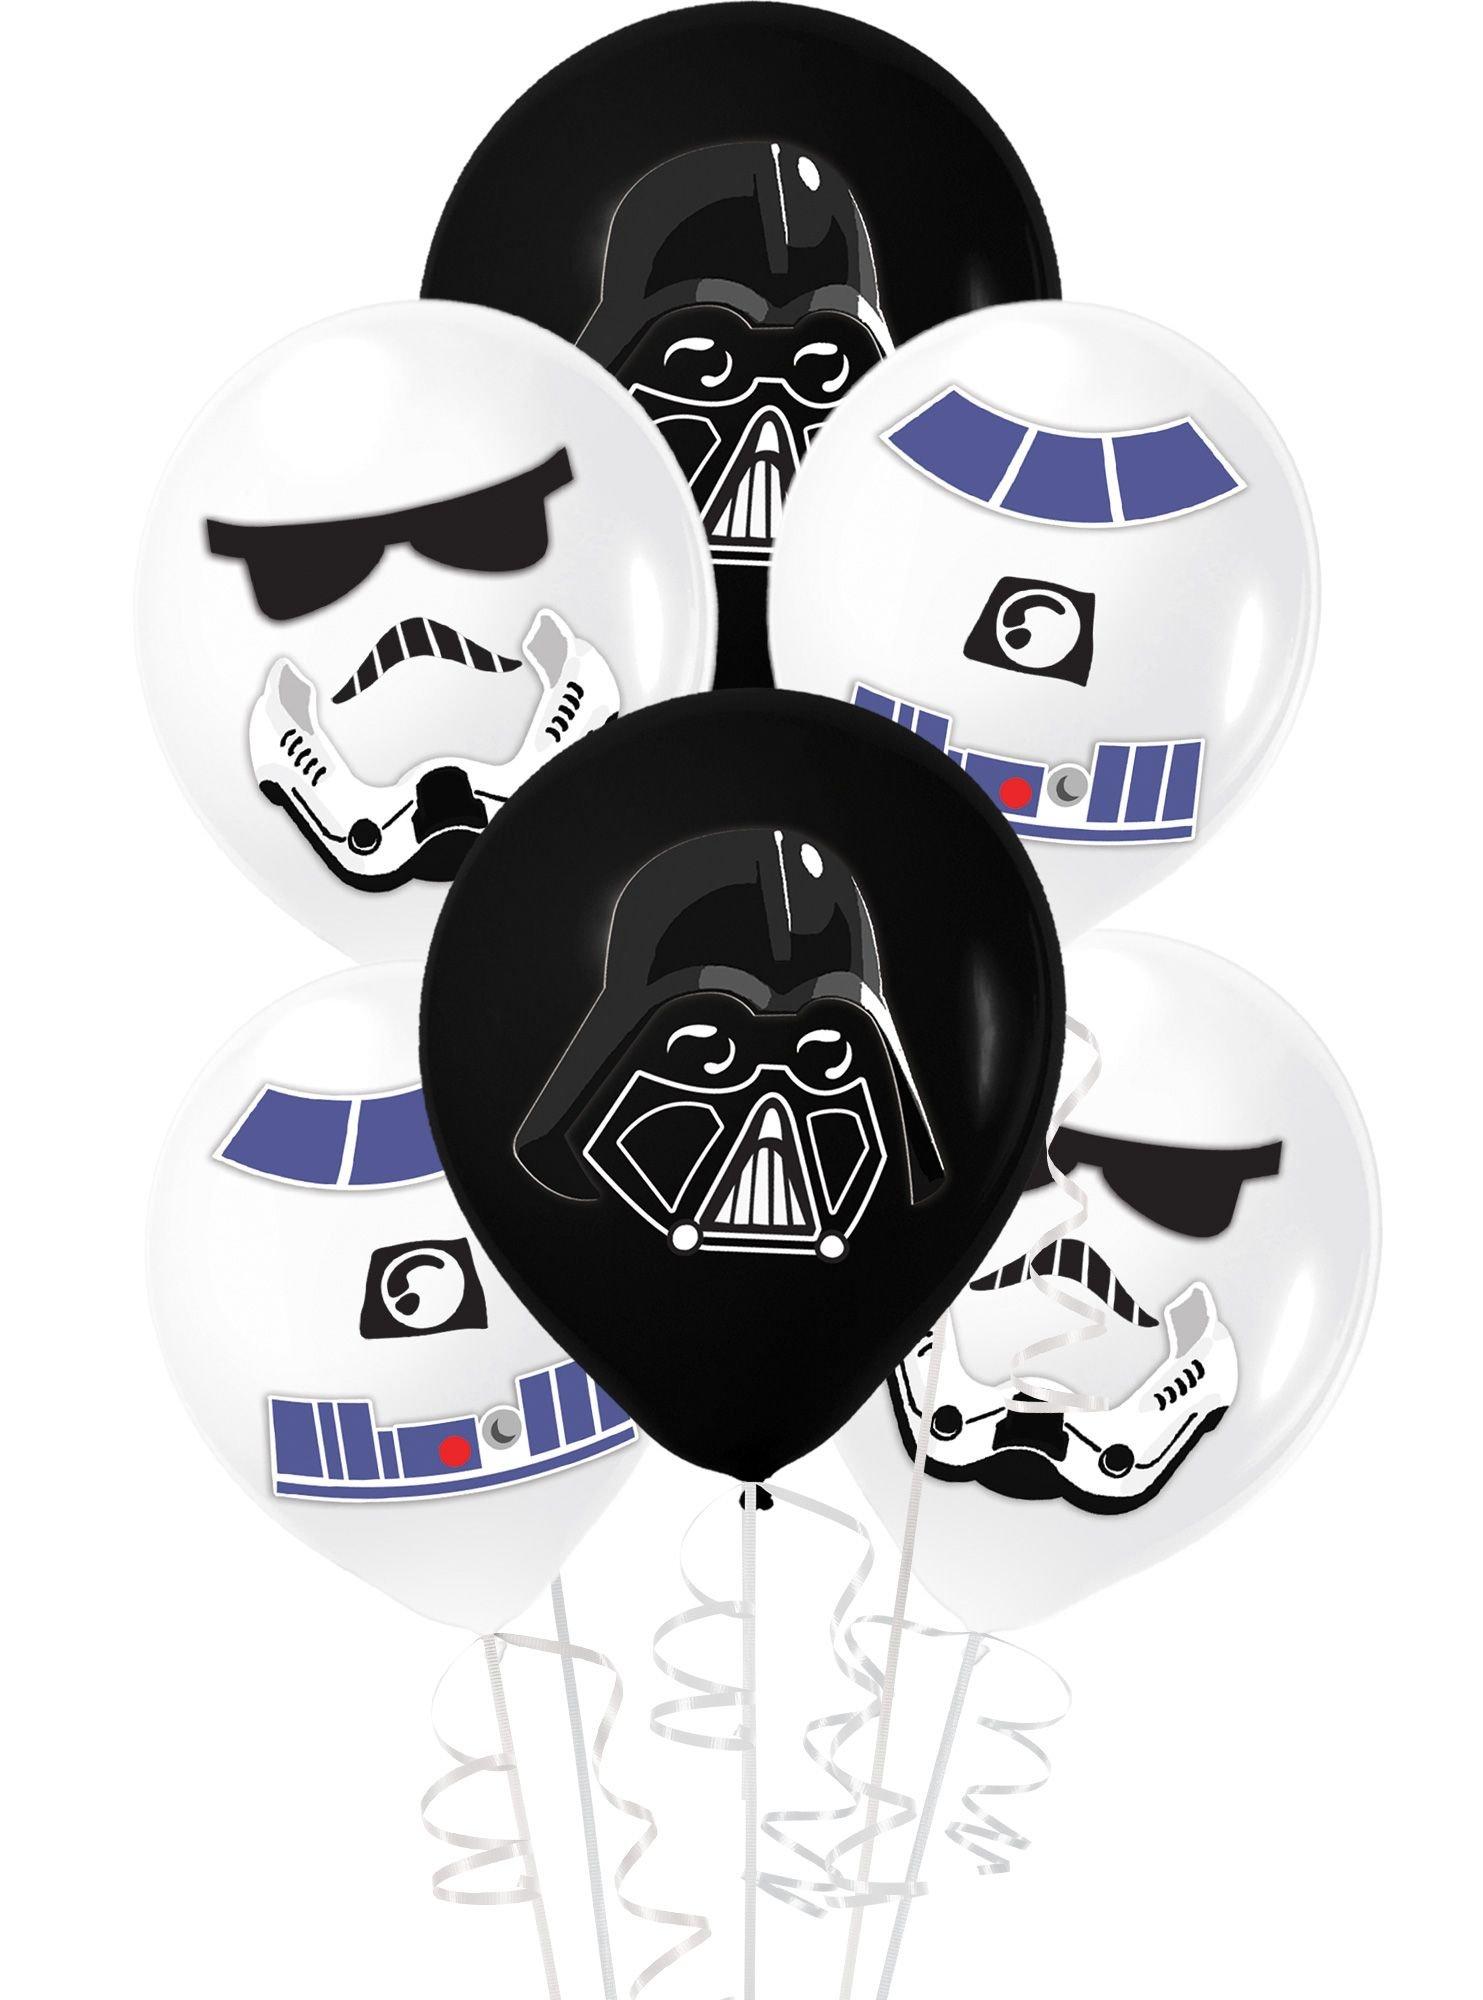 6ct, 12in, Star Wars Galaxy of Adventures Latex Balloon Decorating Kit